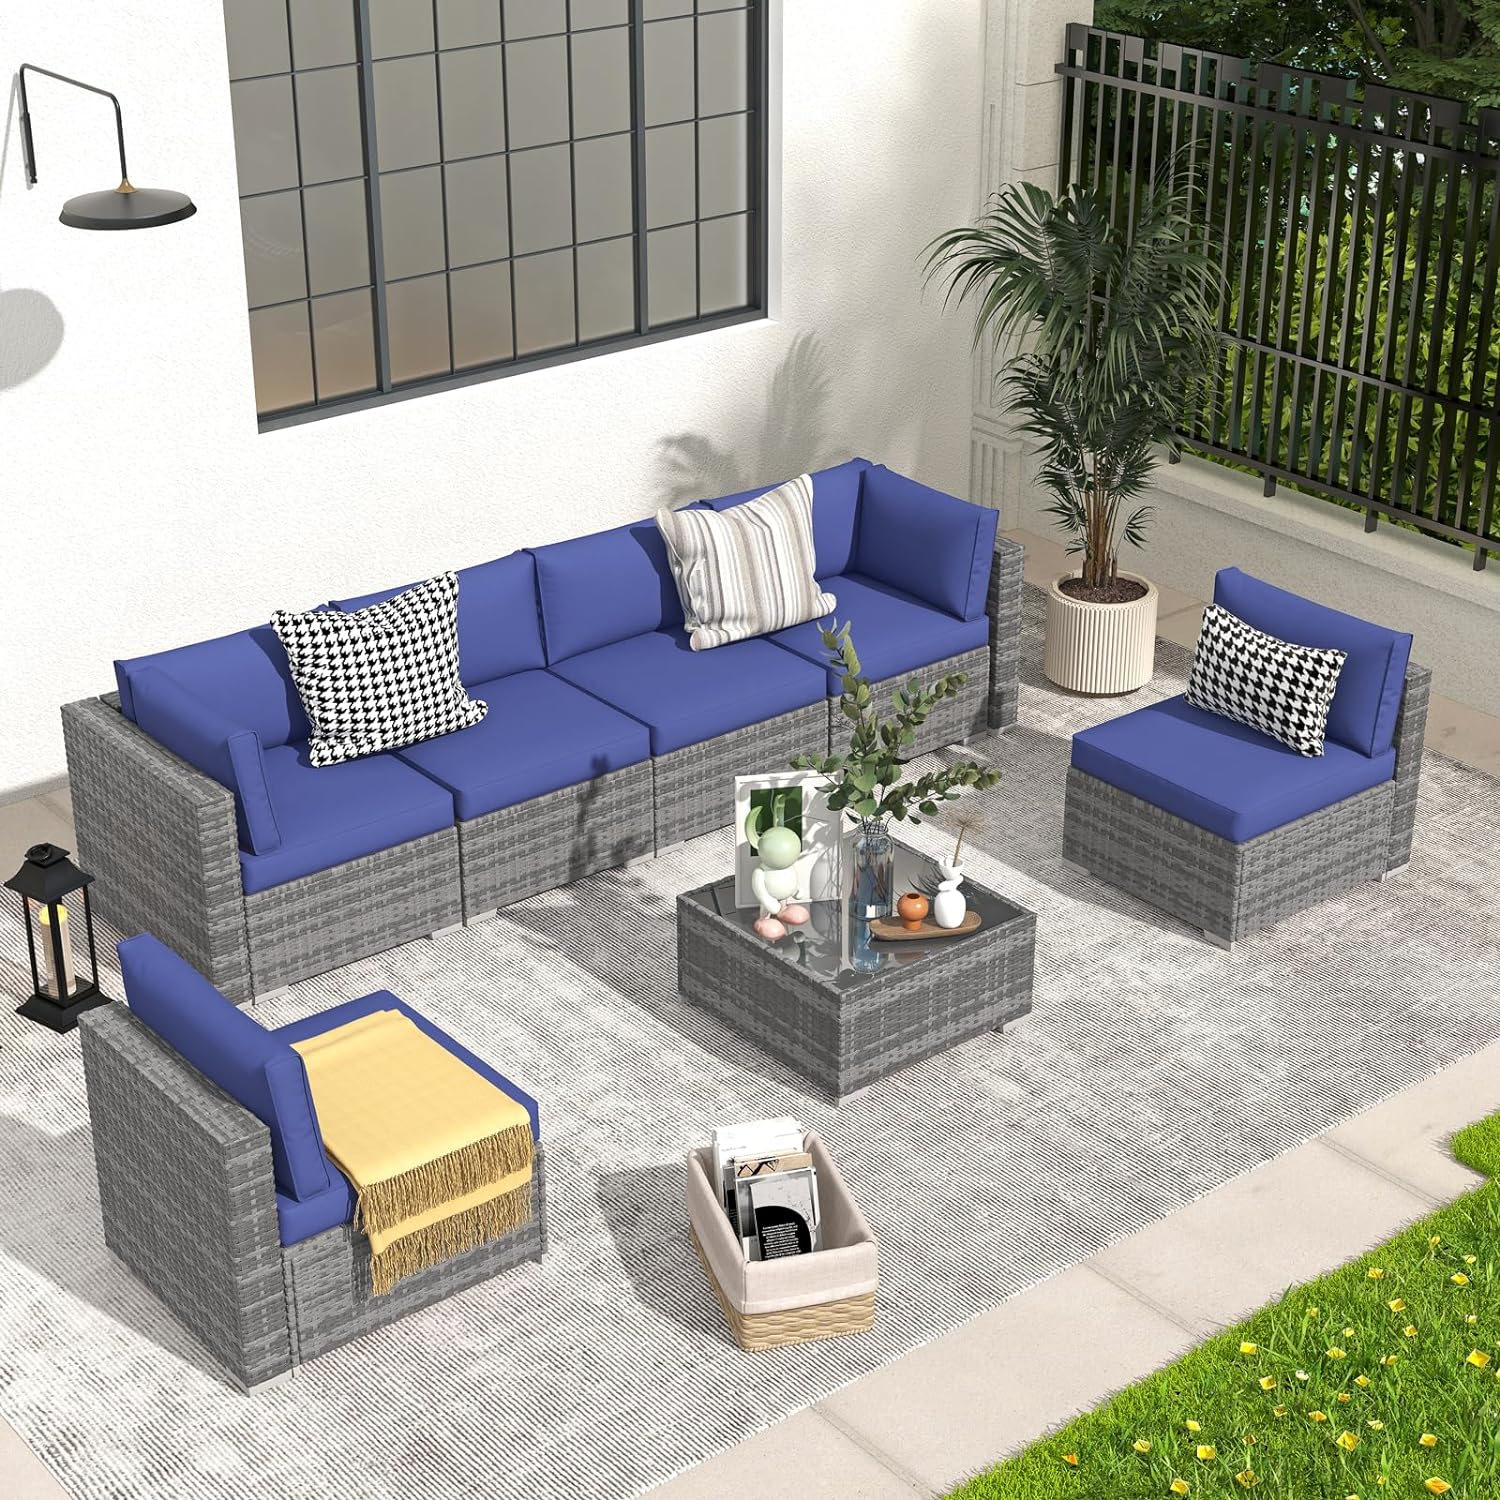 Patiorama 7 Pieces Outdoor Patio Furniture Set, All Weather Grey PE Wicker Rattan Sectional Conversation Set, Porch Garden W/Built-in Glass Table, Seat Clips, Navy Blue Cushions